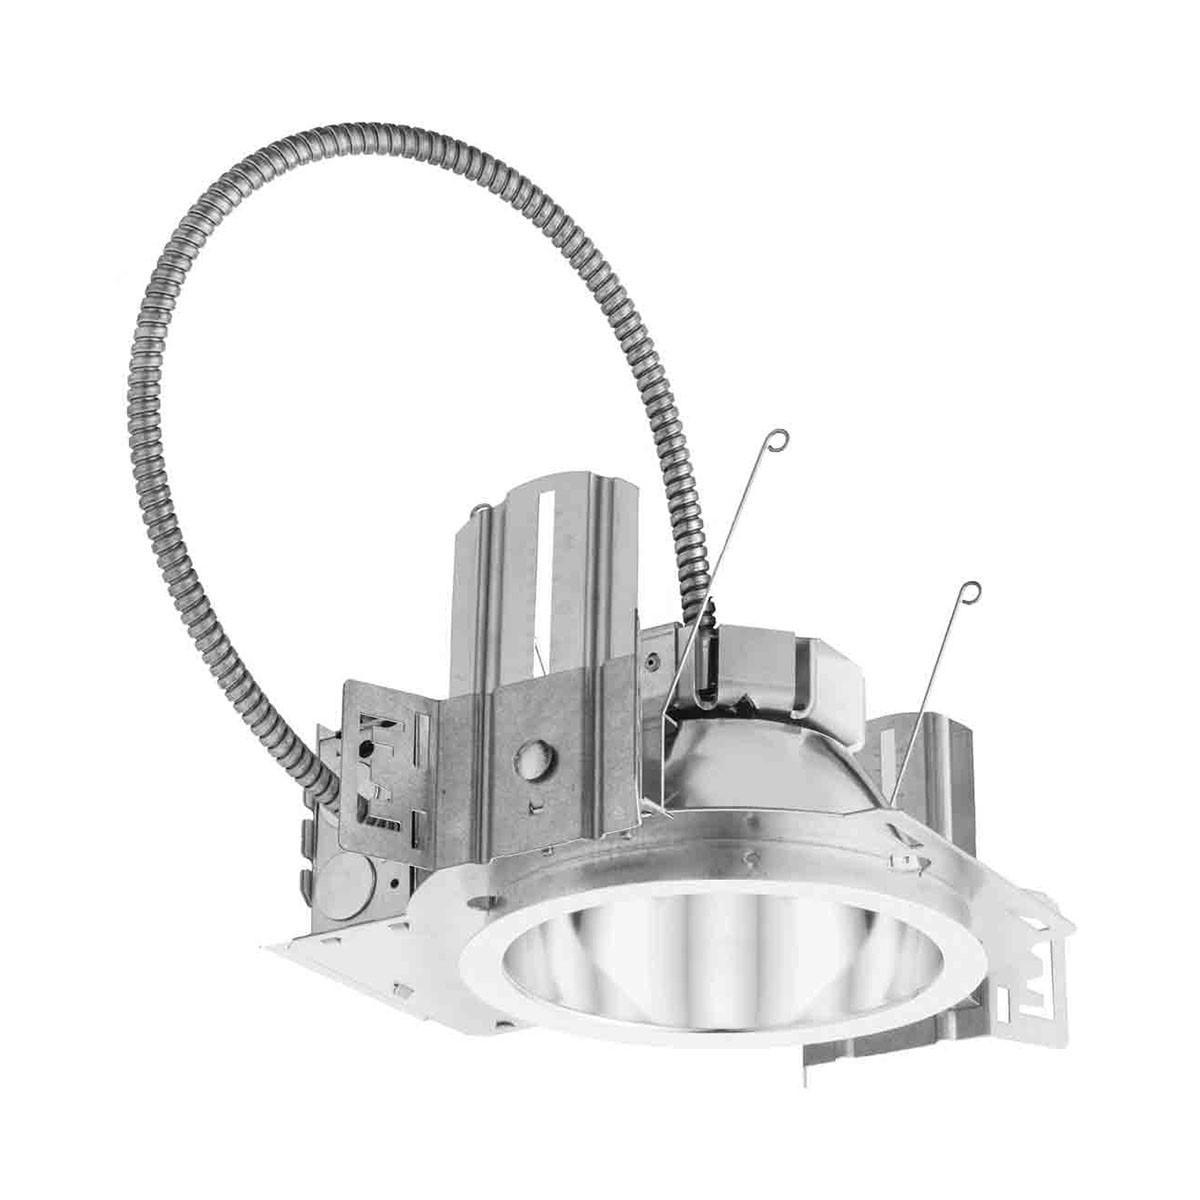 Lithonia LDN6 Commercial LED Recessed Downlight, 2000 lumens, 3500K (Reflector Sold Separately) - Bees Lighting